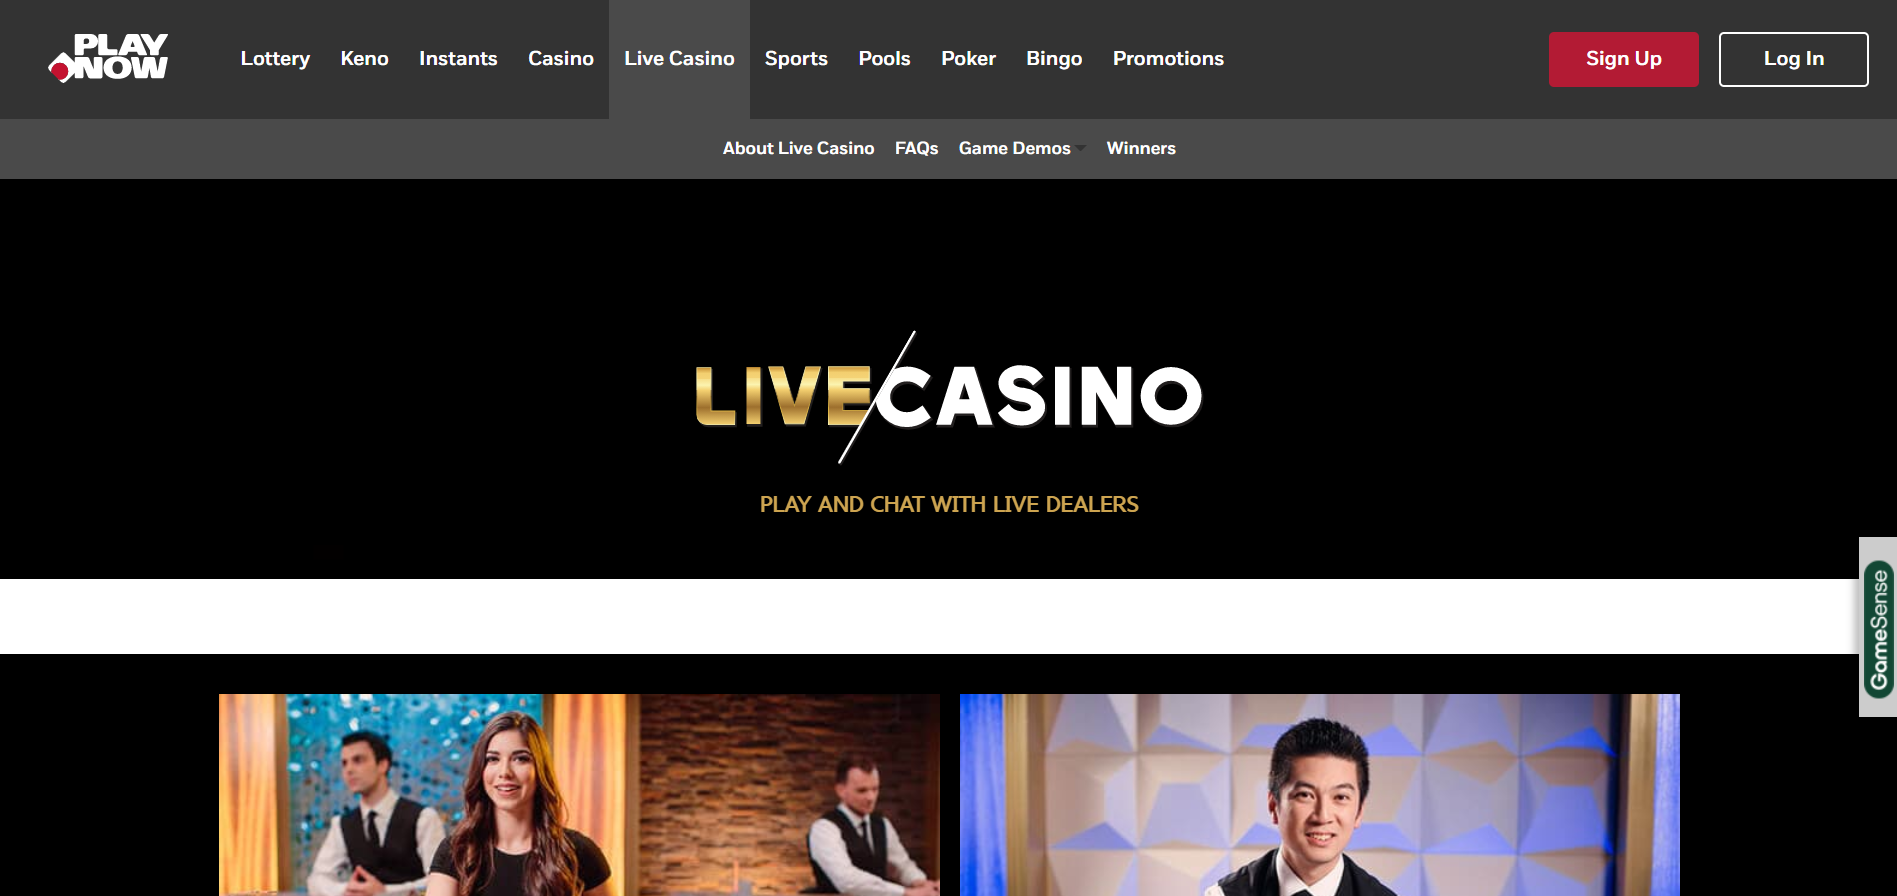 Play Now Live Casino